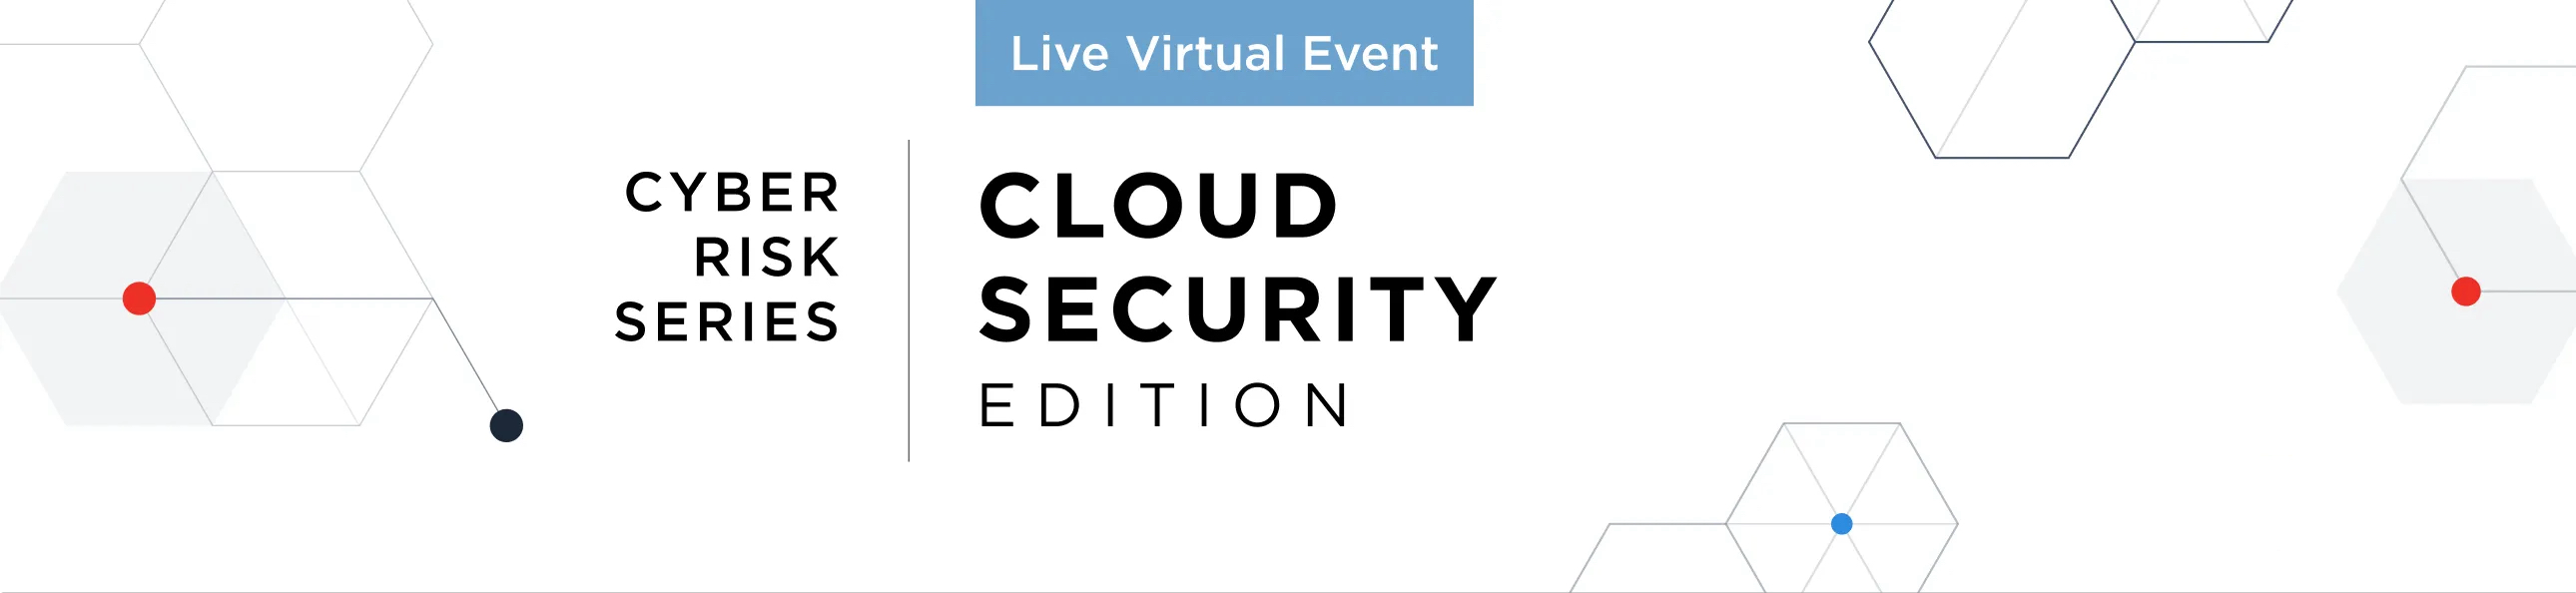 Cyber Risk Series: Cloud Security Edition